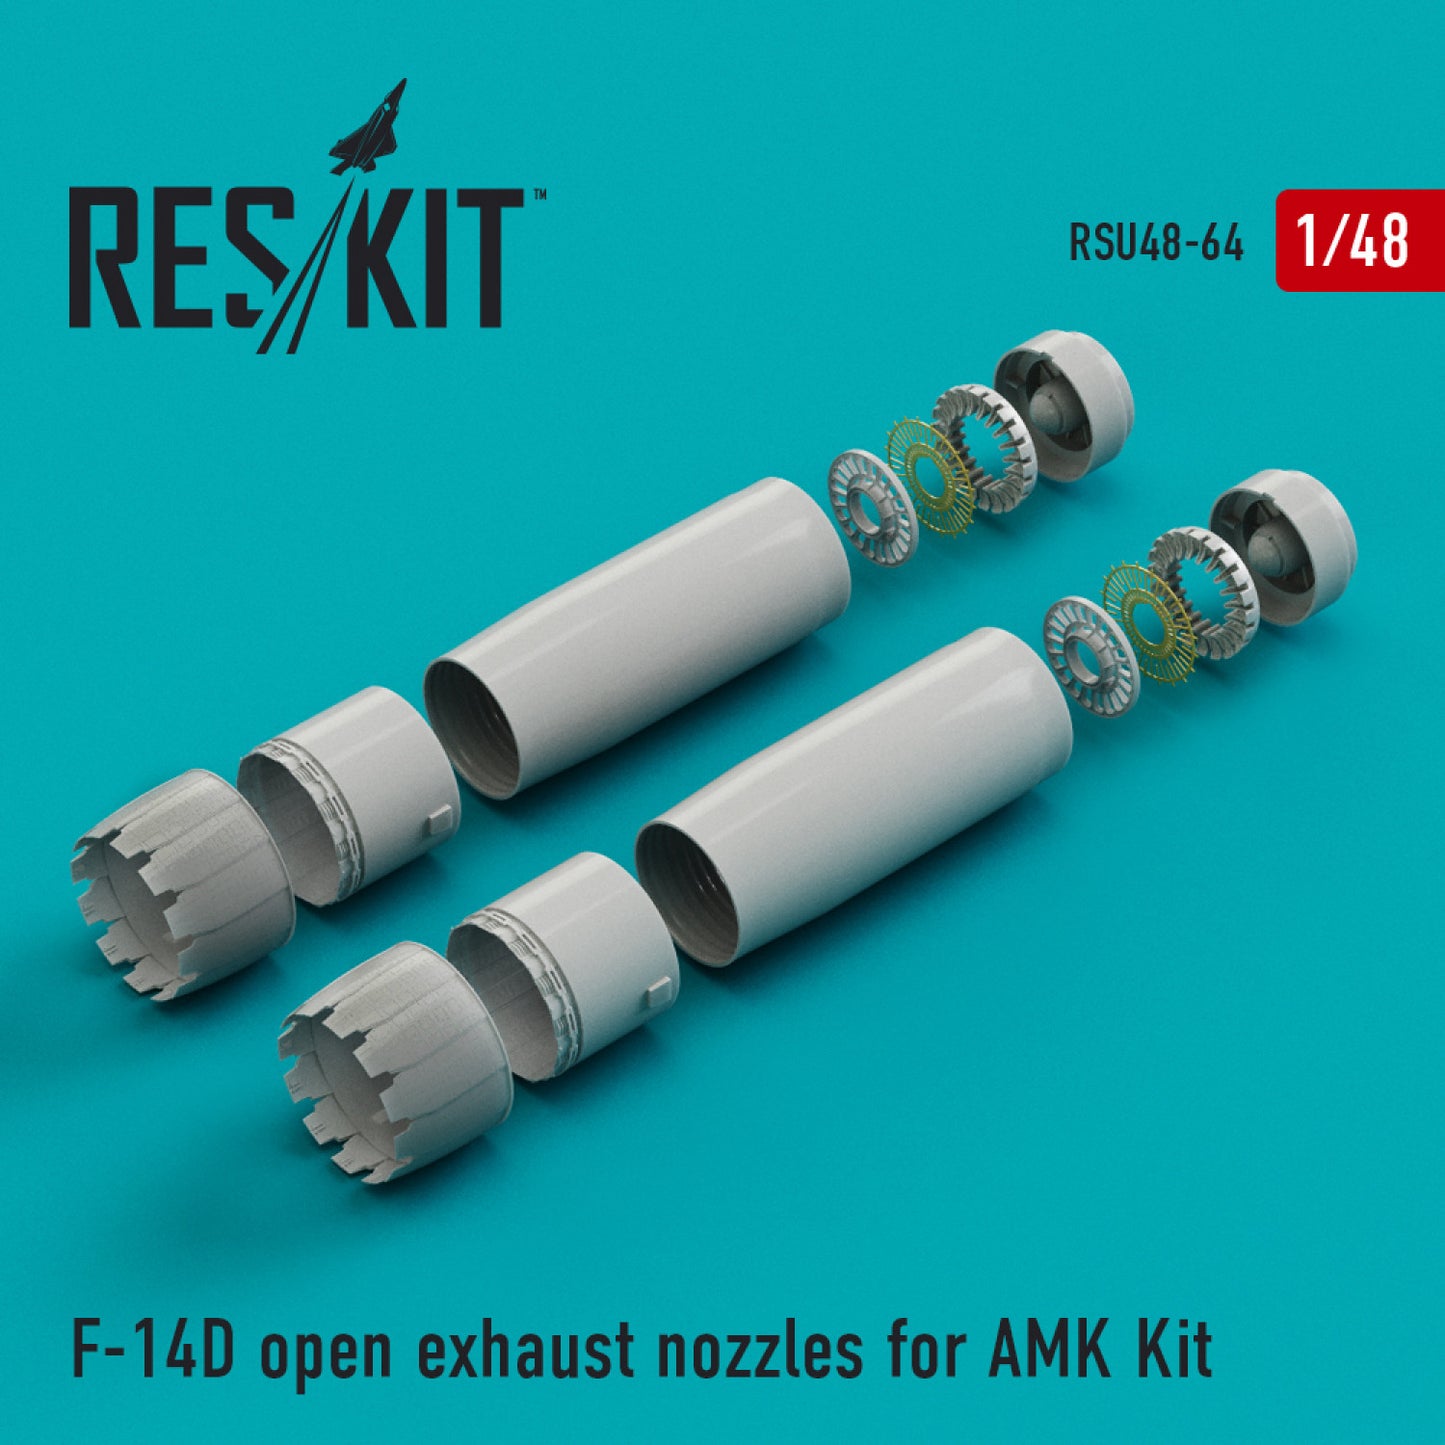 Res/Kit 1:48 F-14D open exhaust nozzles for AMK Kit